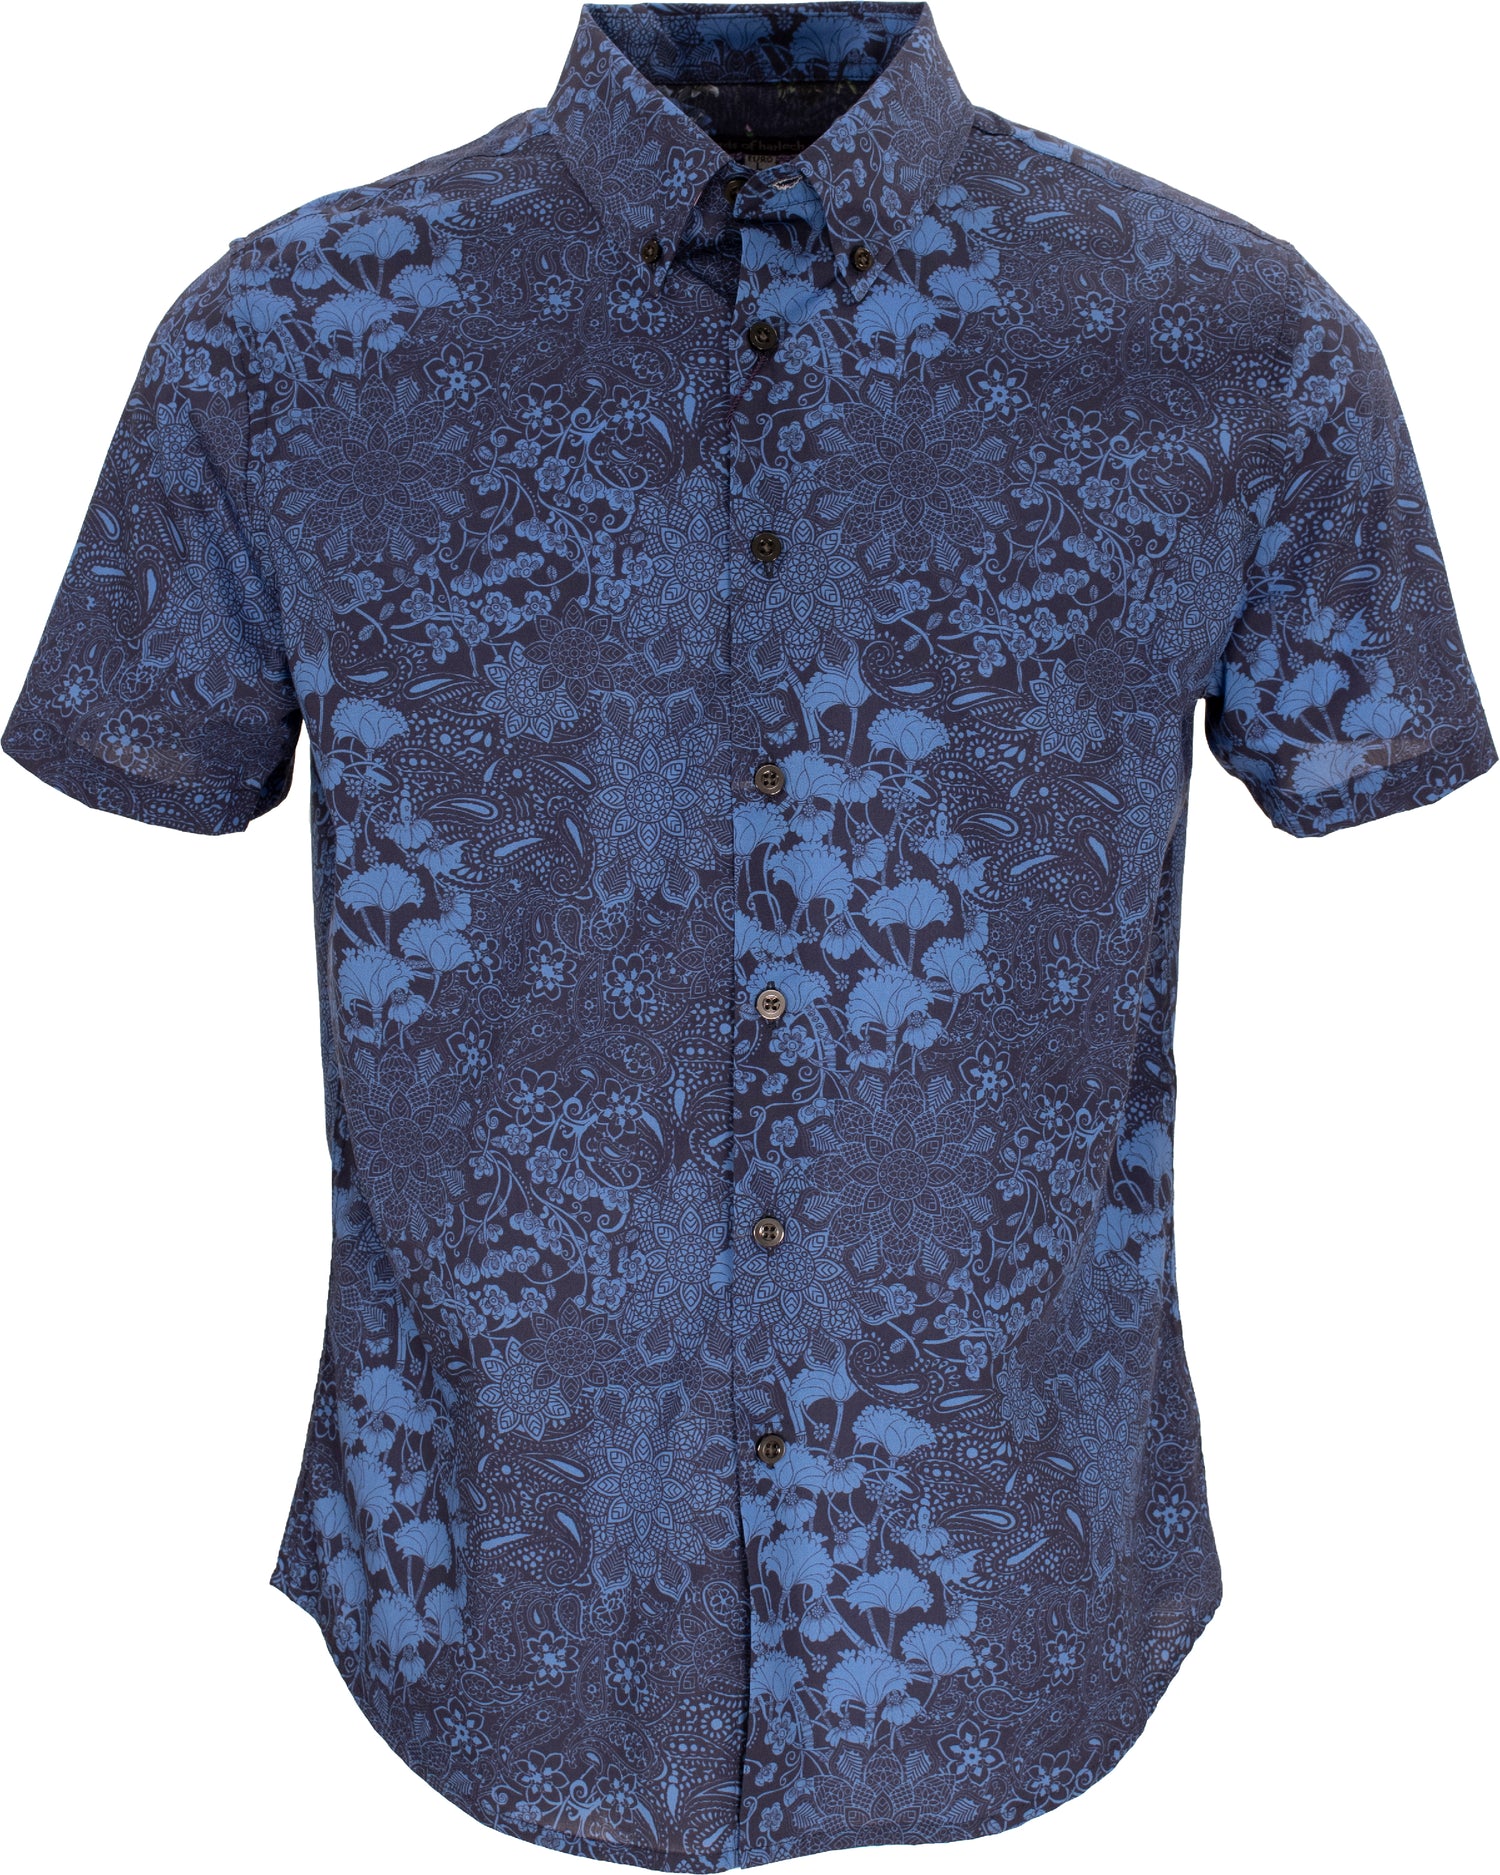 Tim Paisley Floral Navy Shirt – Lords Of Harlech